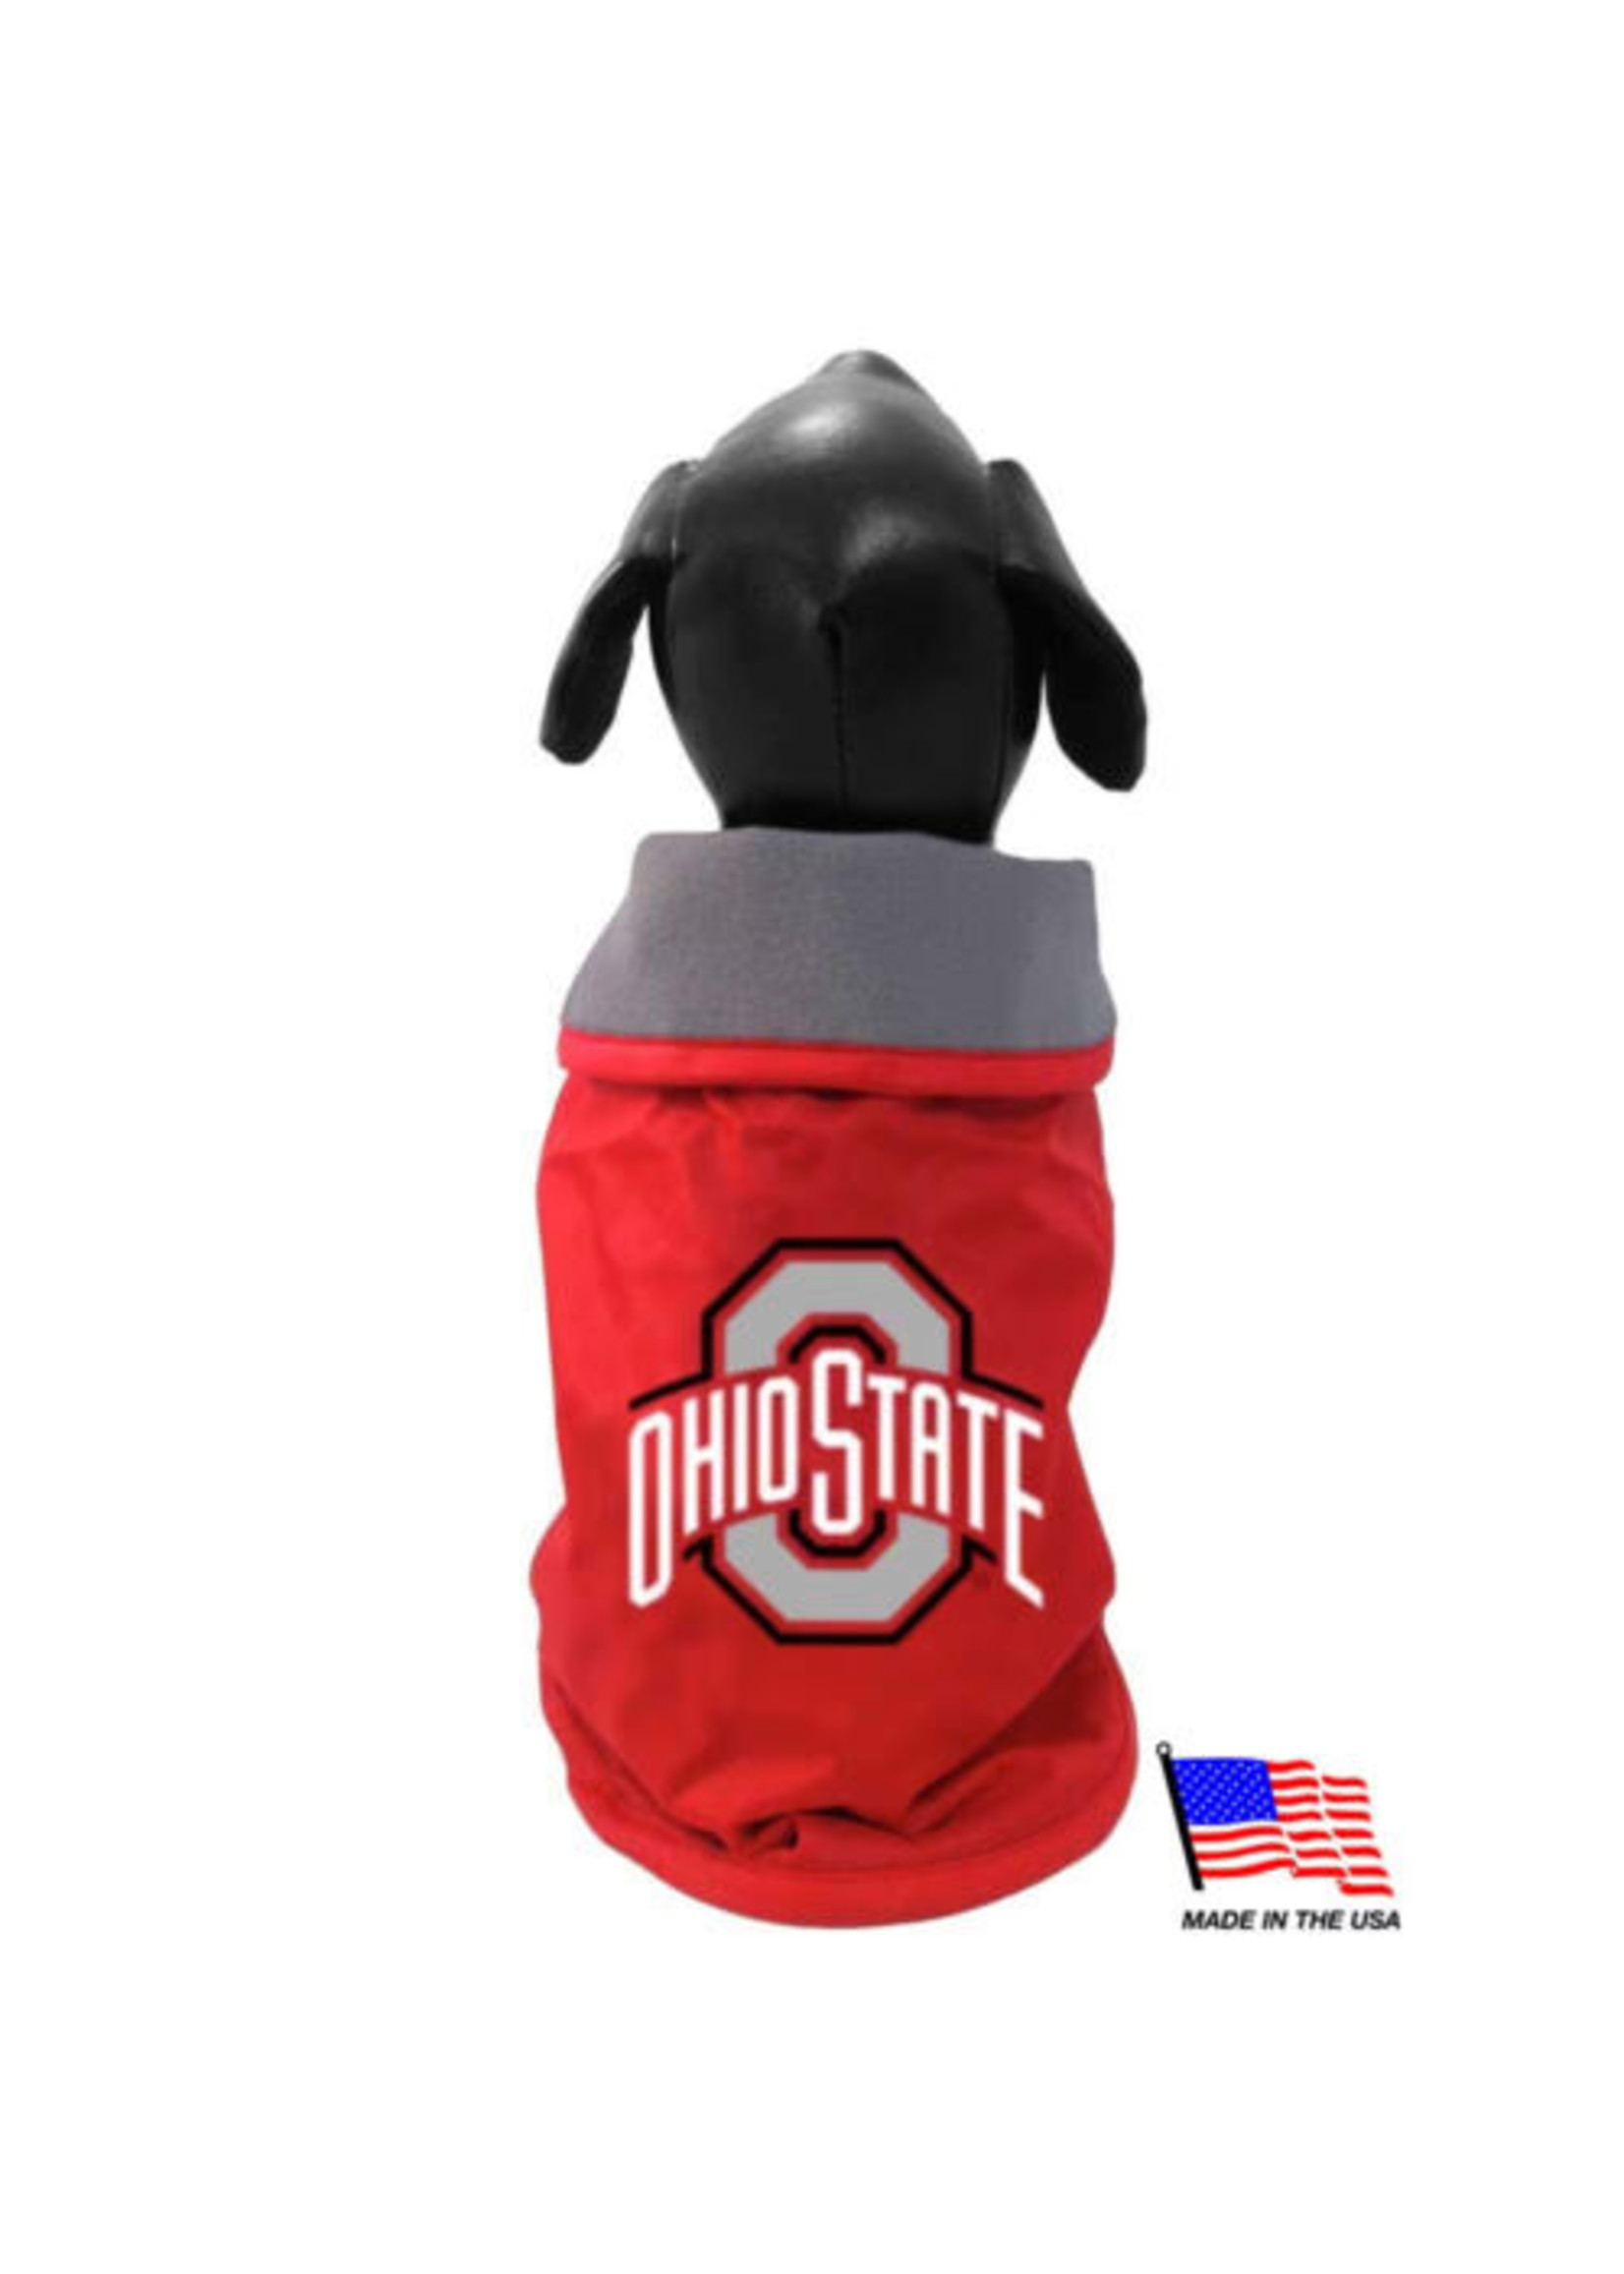 ALL STAR DOGS OSU DOGGIE REVERSIBLE JACKET